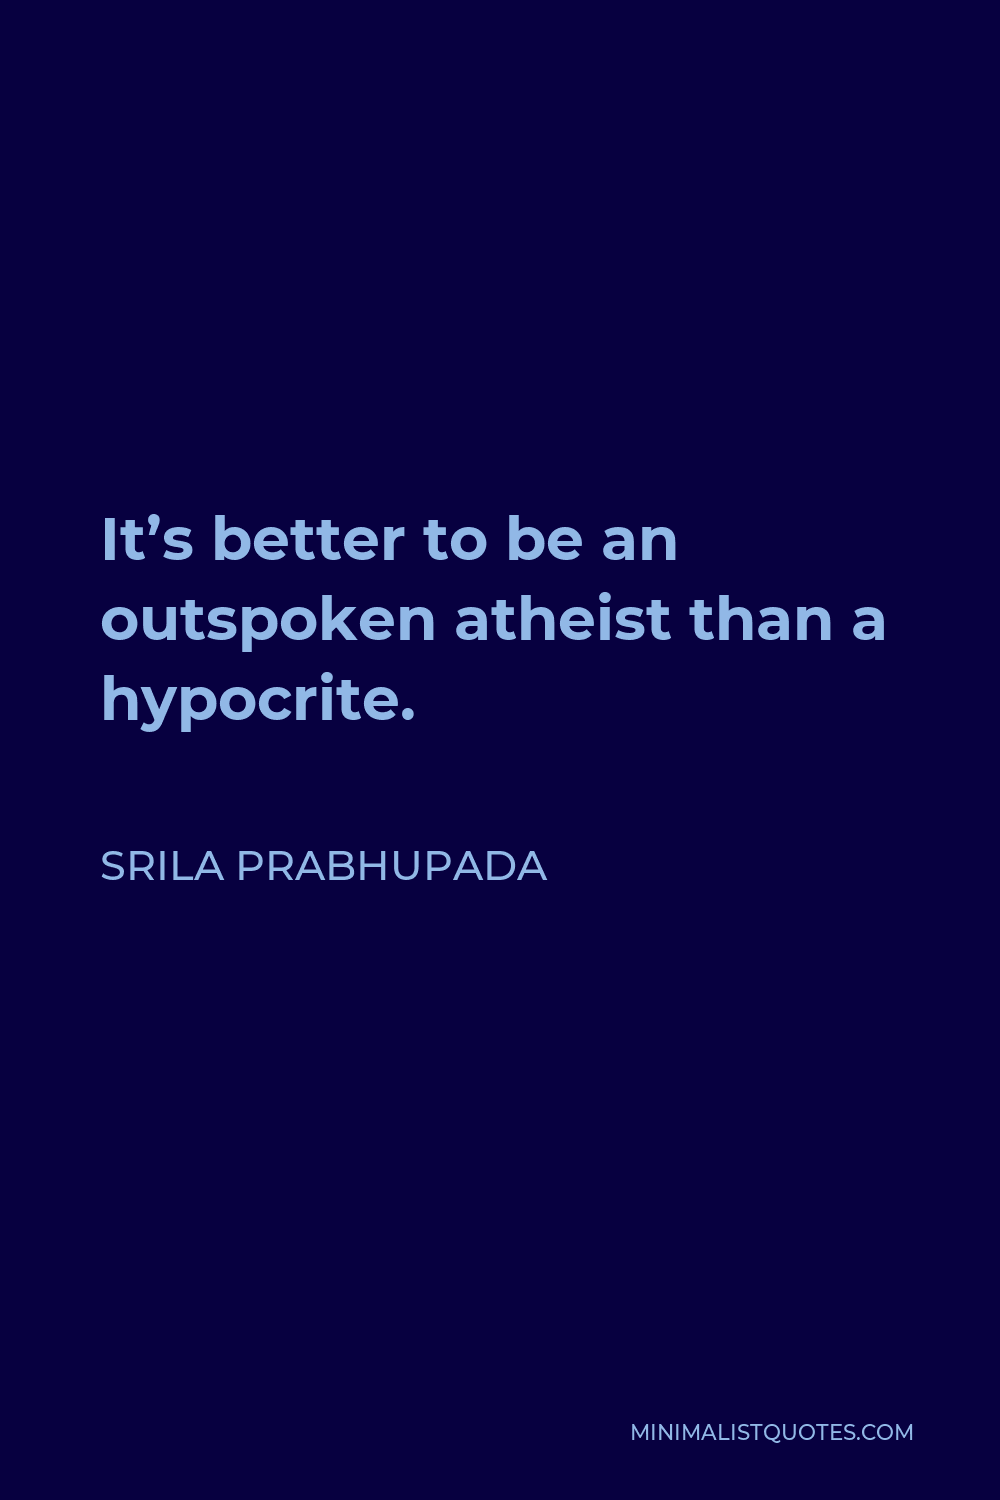 Srila Prabhupada Quote - It’s better to be an outspoken atheist than a hypocrite.